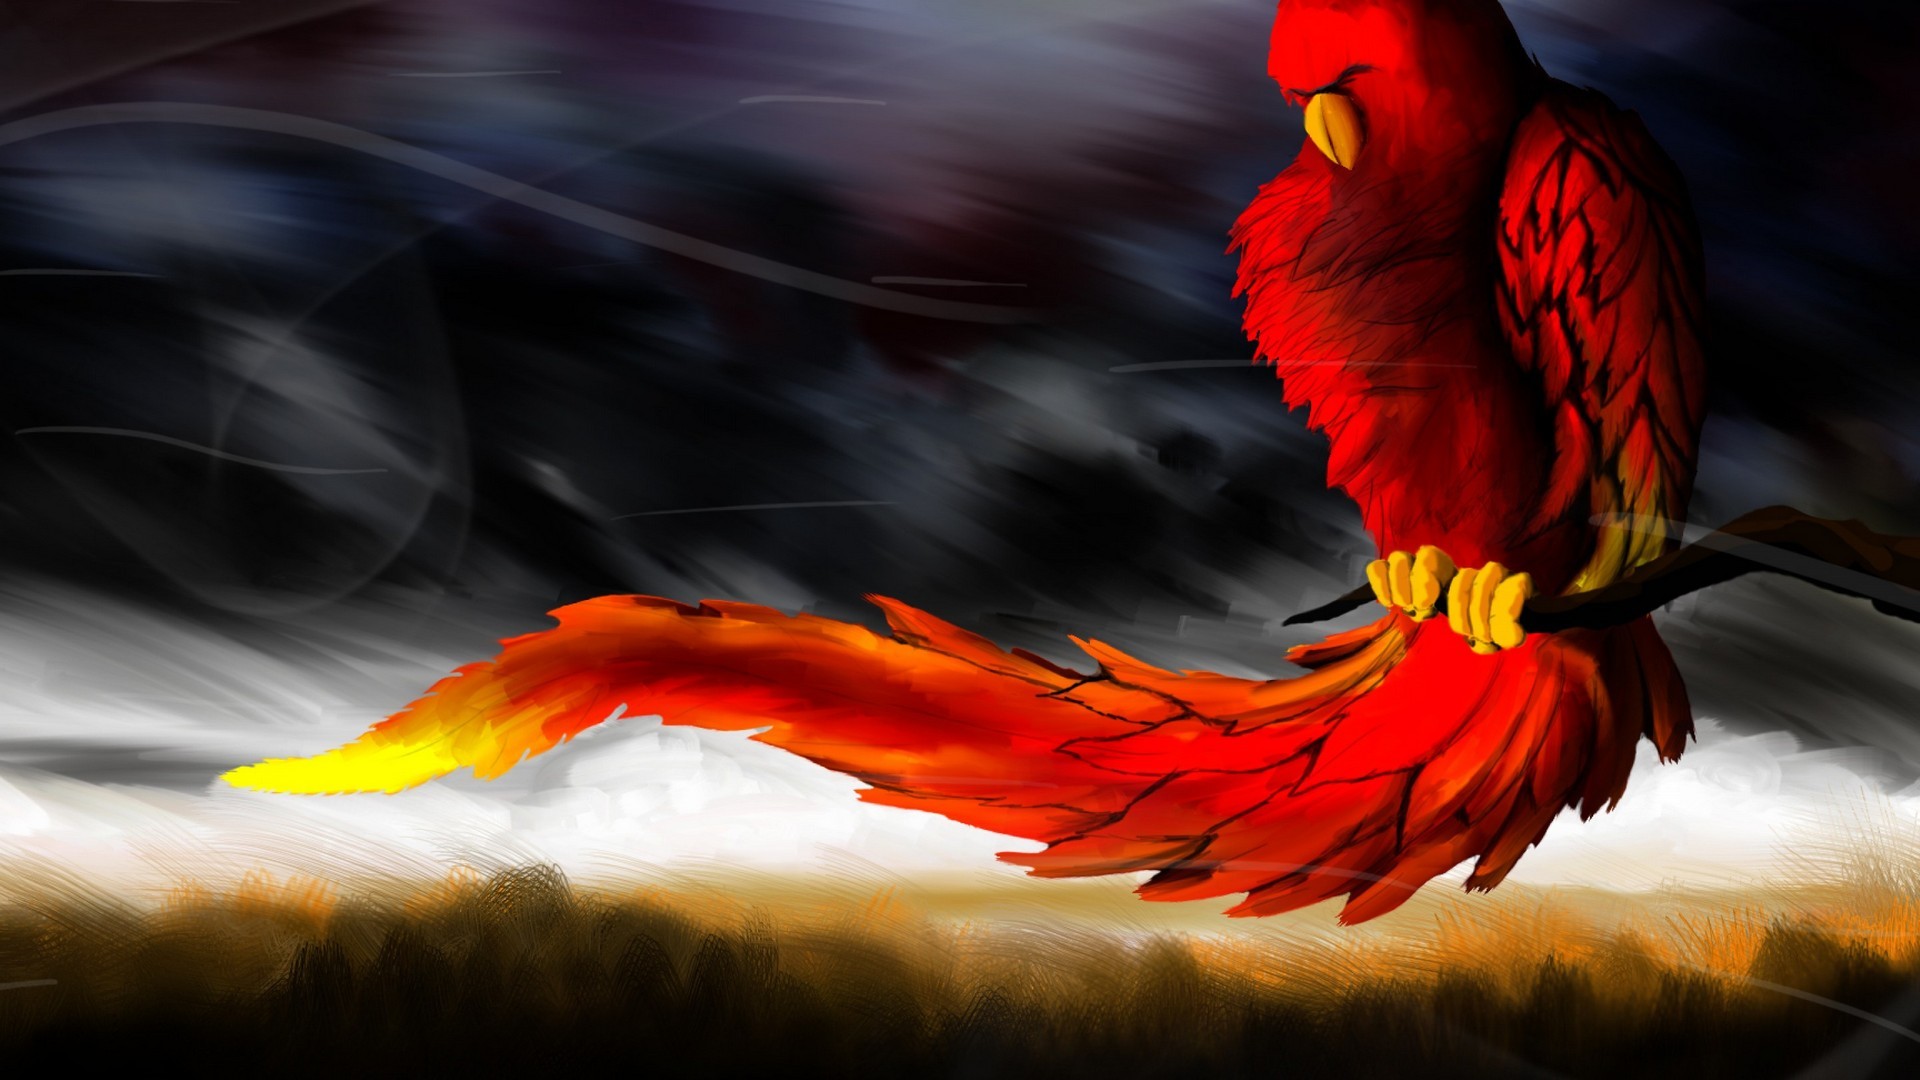 1920x1080 Phoenix Bird Background Wallpaper HD with image resolution  pixel.  You can make this wallpaper